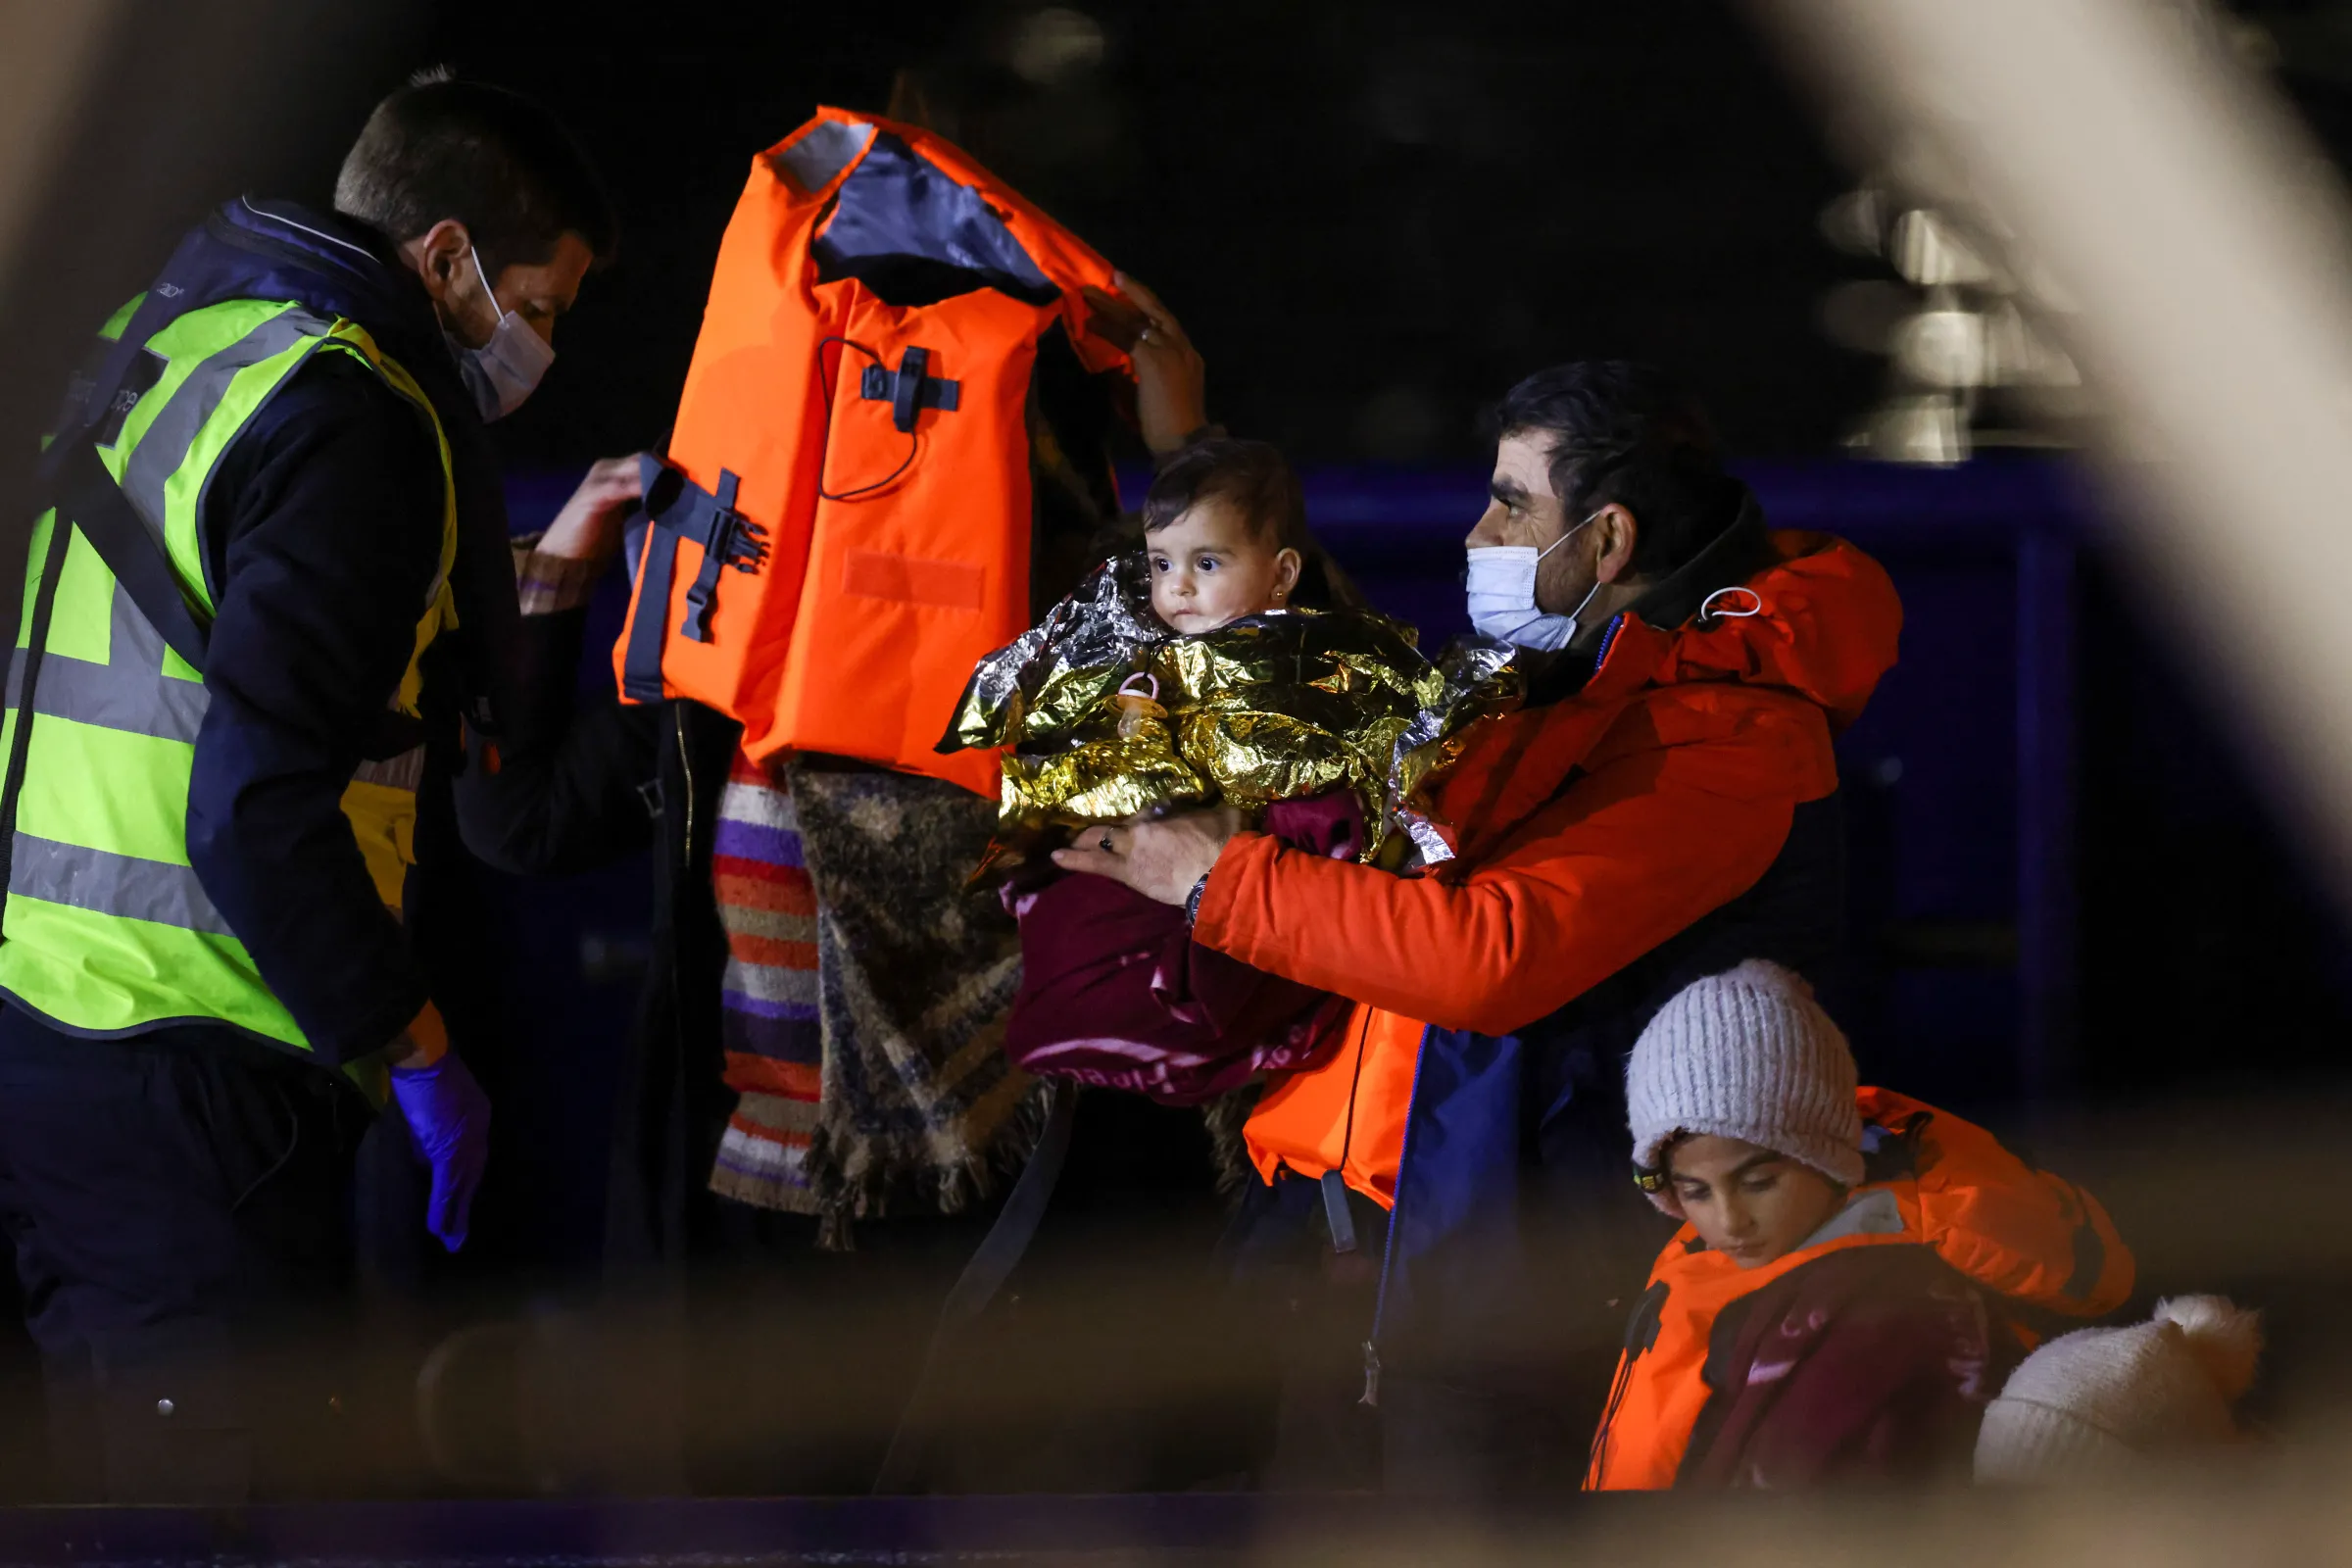 A migrant family arrives at the Port of Dover after being helped by Royal National Lifeboat Institution (RNLI), in Dover, Britain December 16, 2021